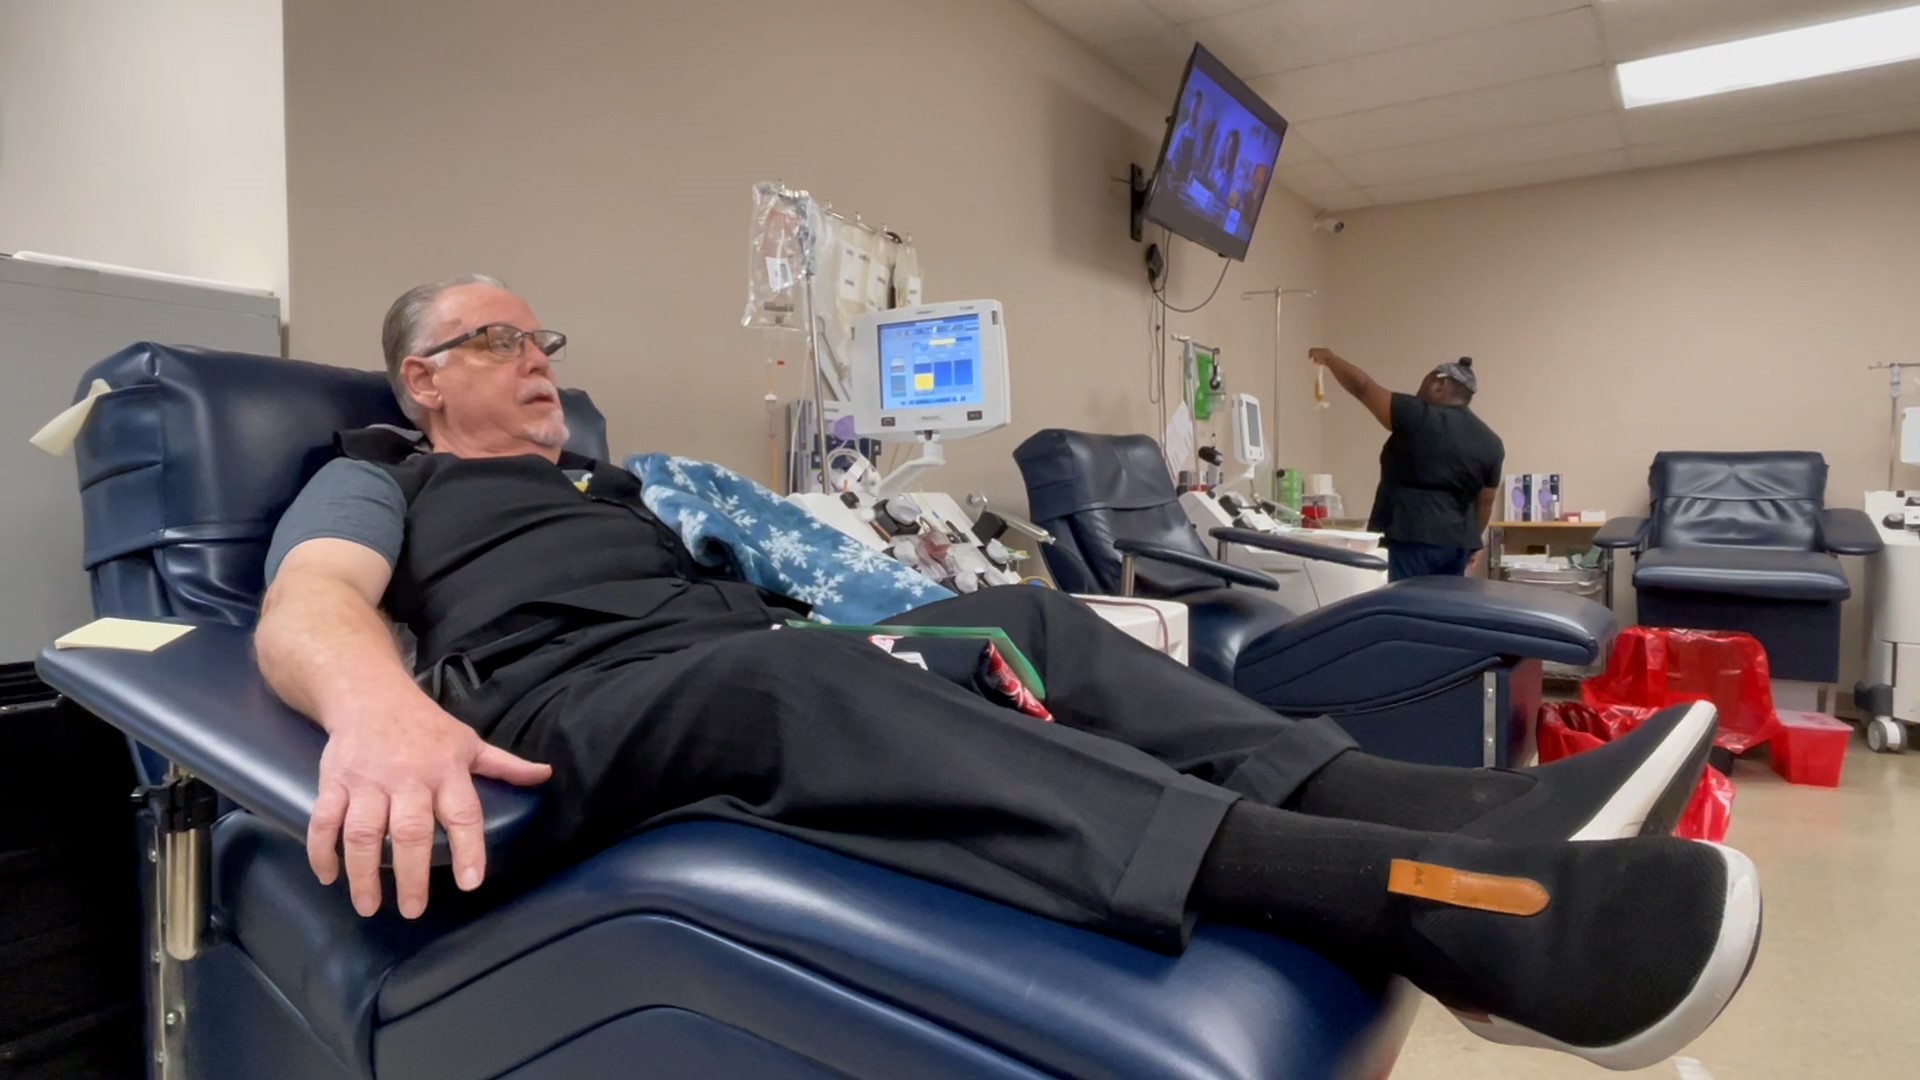 The Blood Center says new donors are desperately needed to help replenish dwindling reserves.